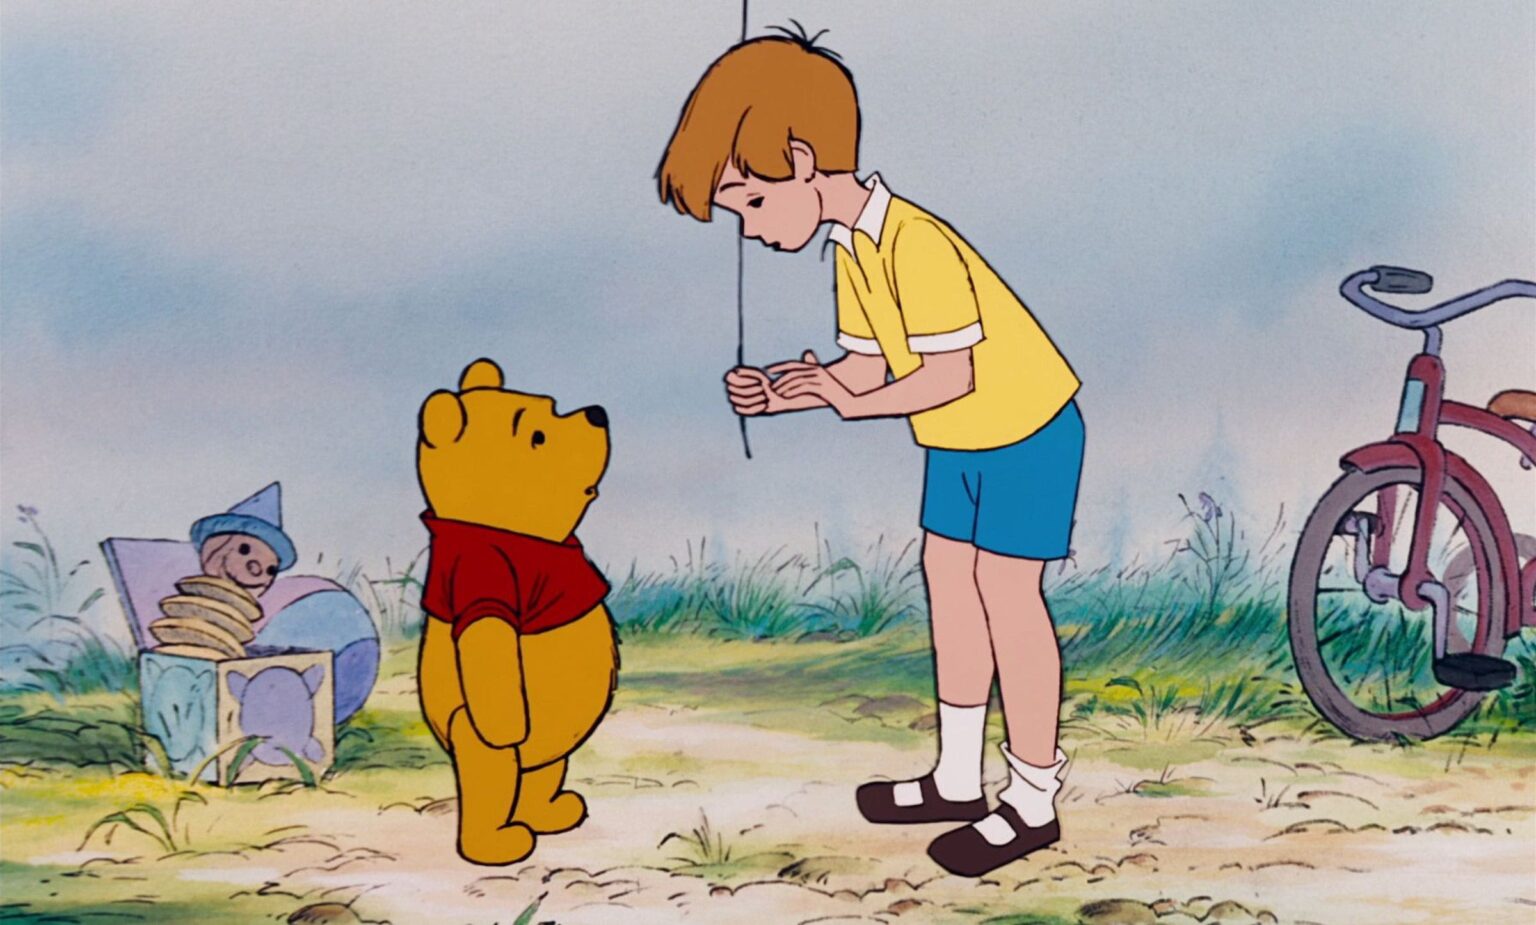 Nothing says comfort like the sweet words from our favorite Disney movies. Revisit the magic with these wise quotes from 'Winnie the Pooh' to 'Soul'.